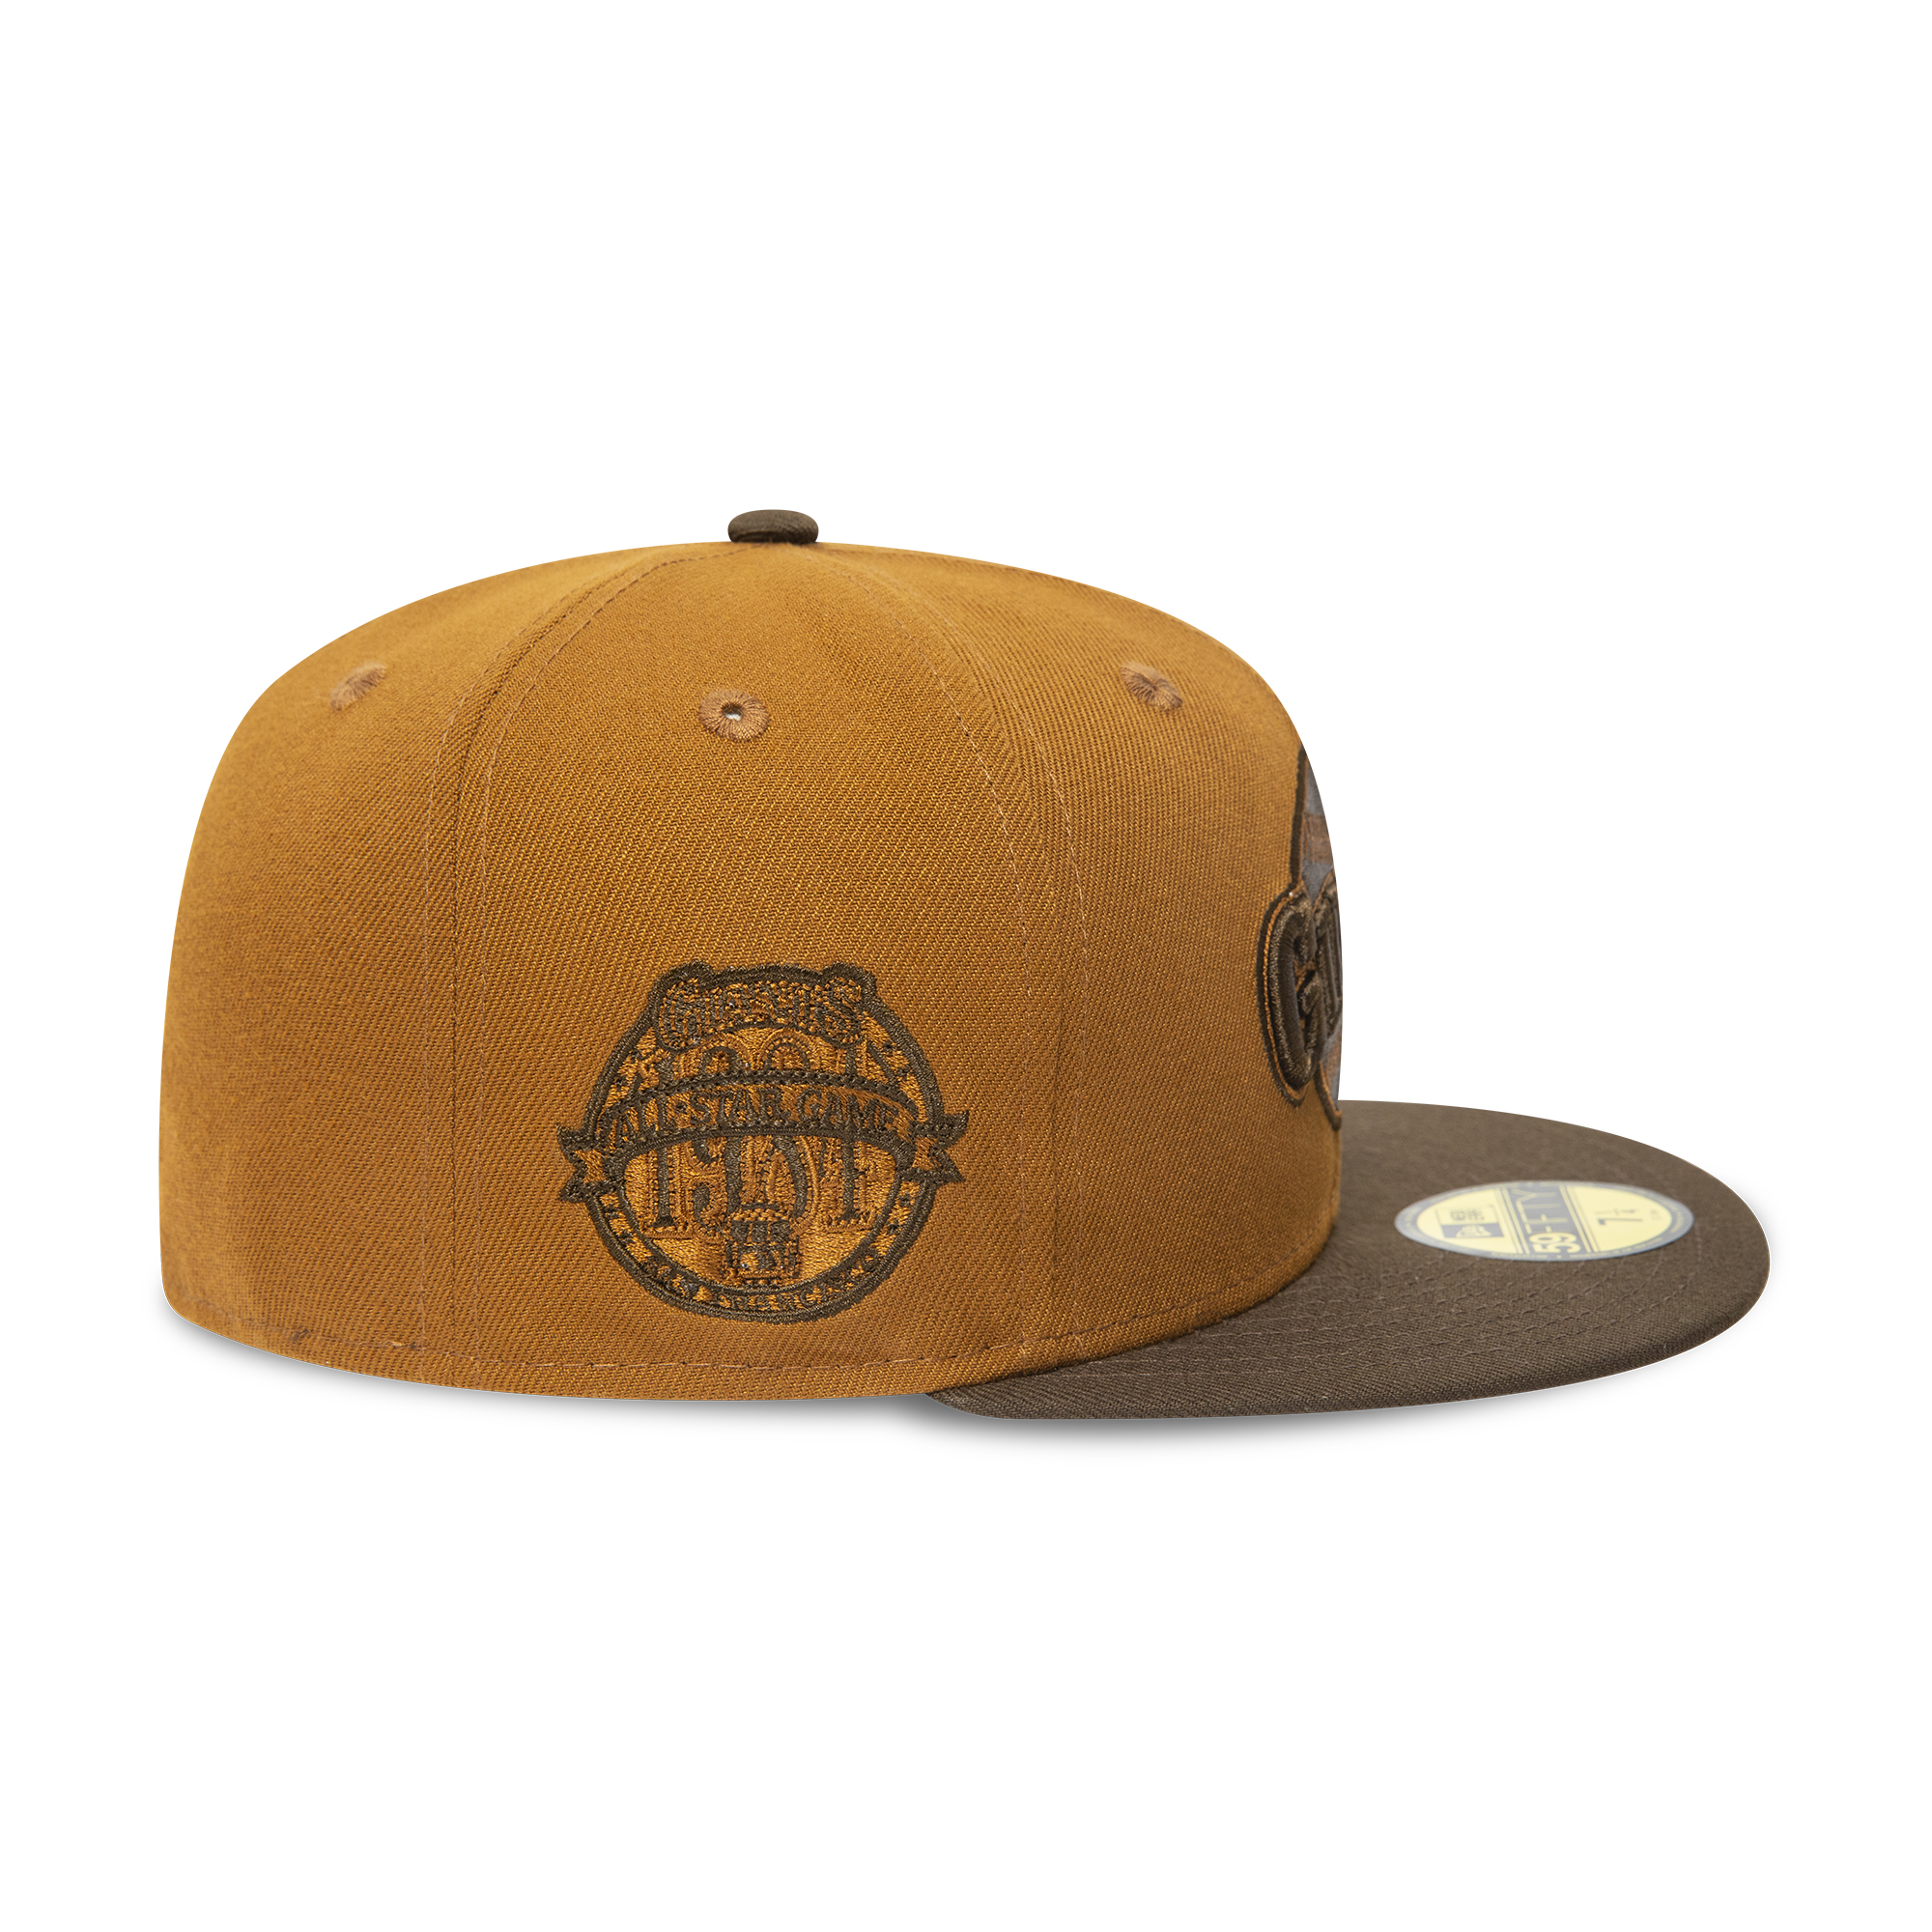 Official New Era San Francisco Giants MLB Toasted Peanut 59FIFTY Fitted